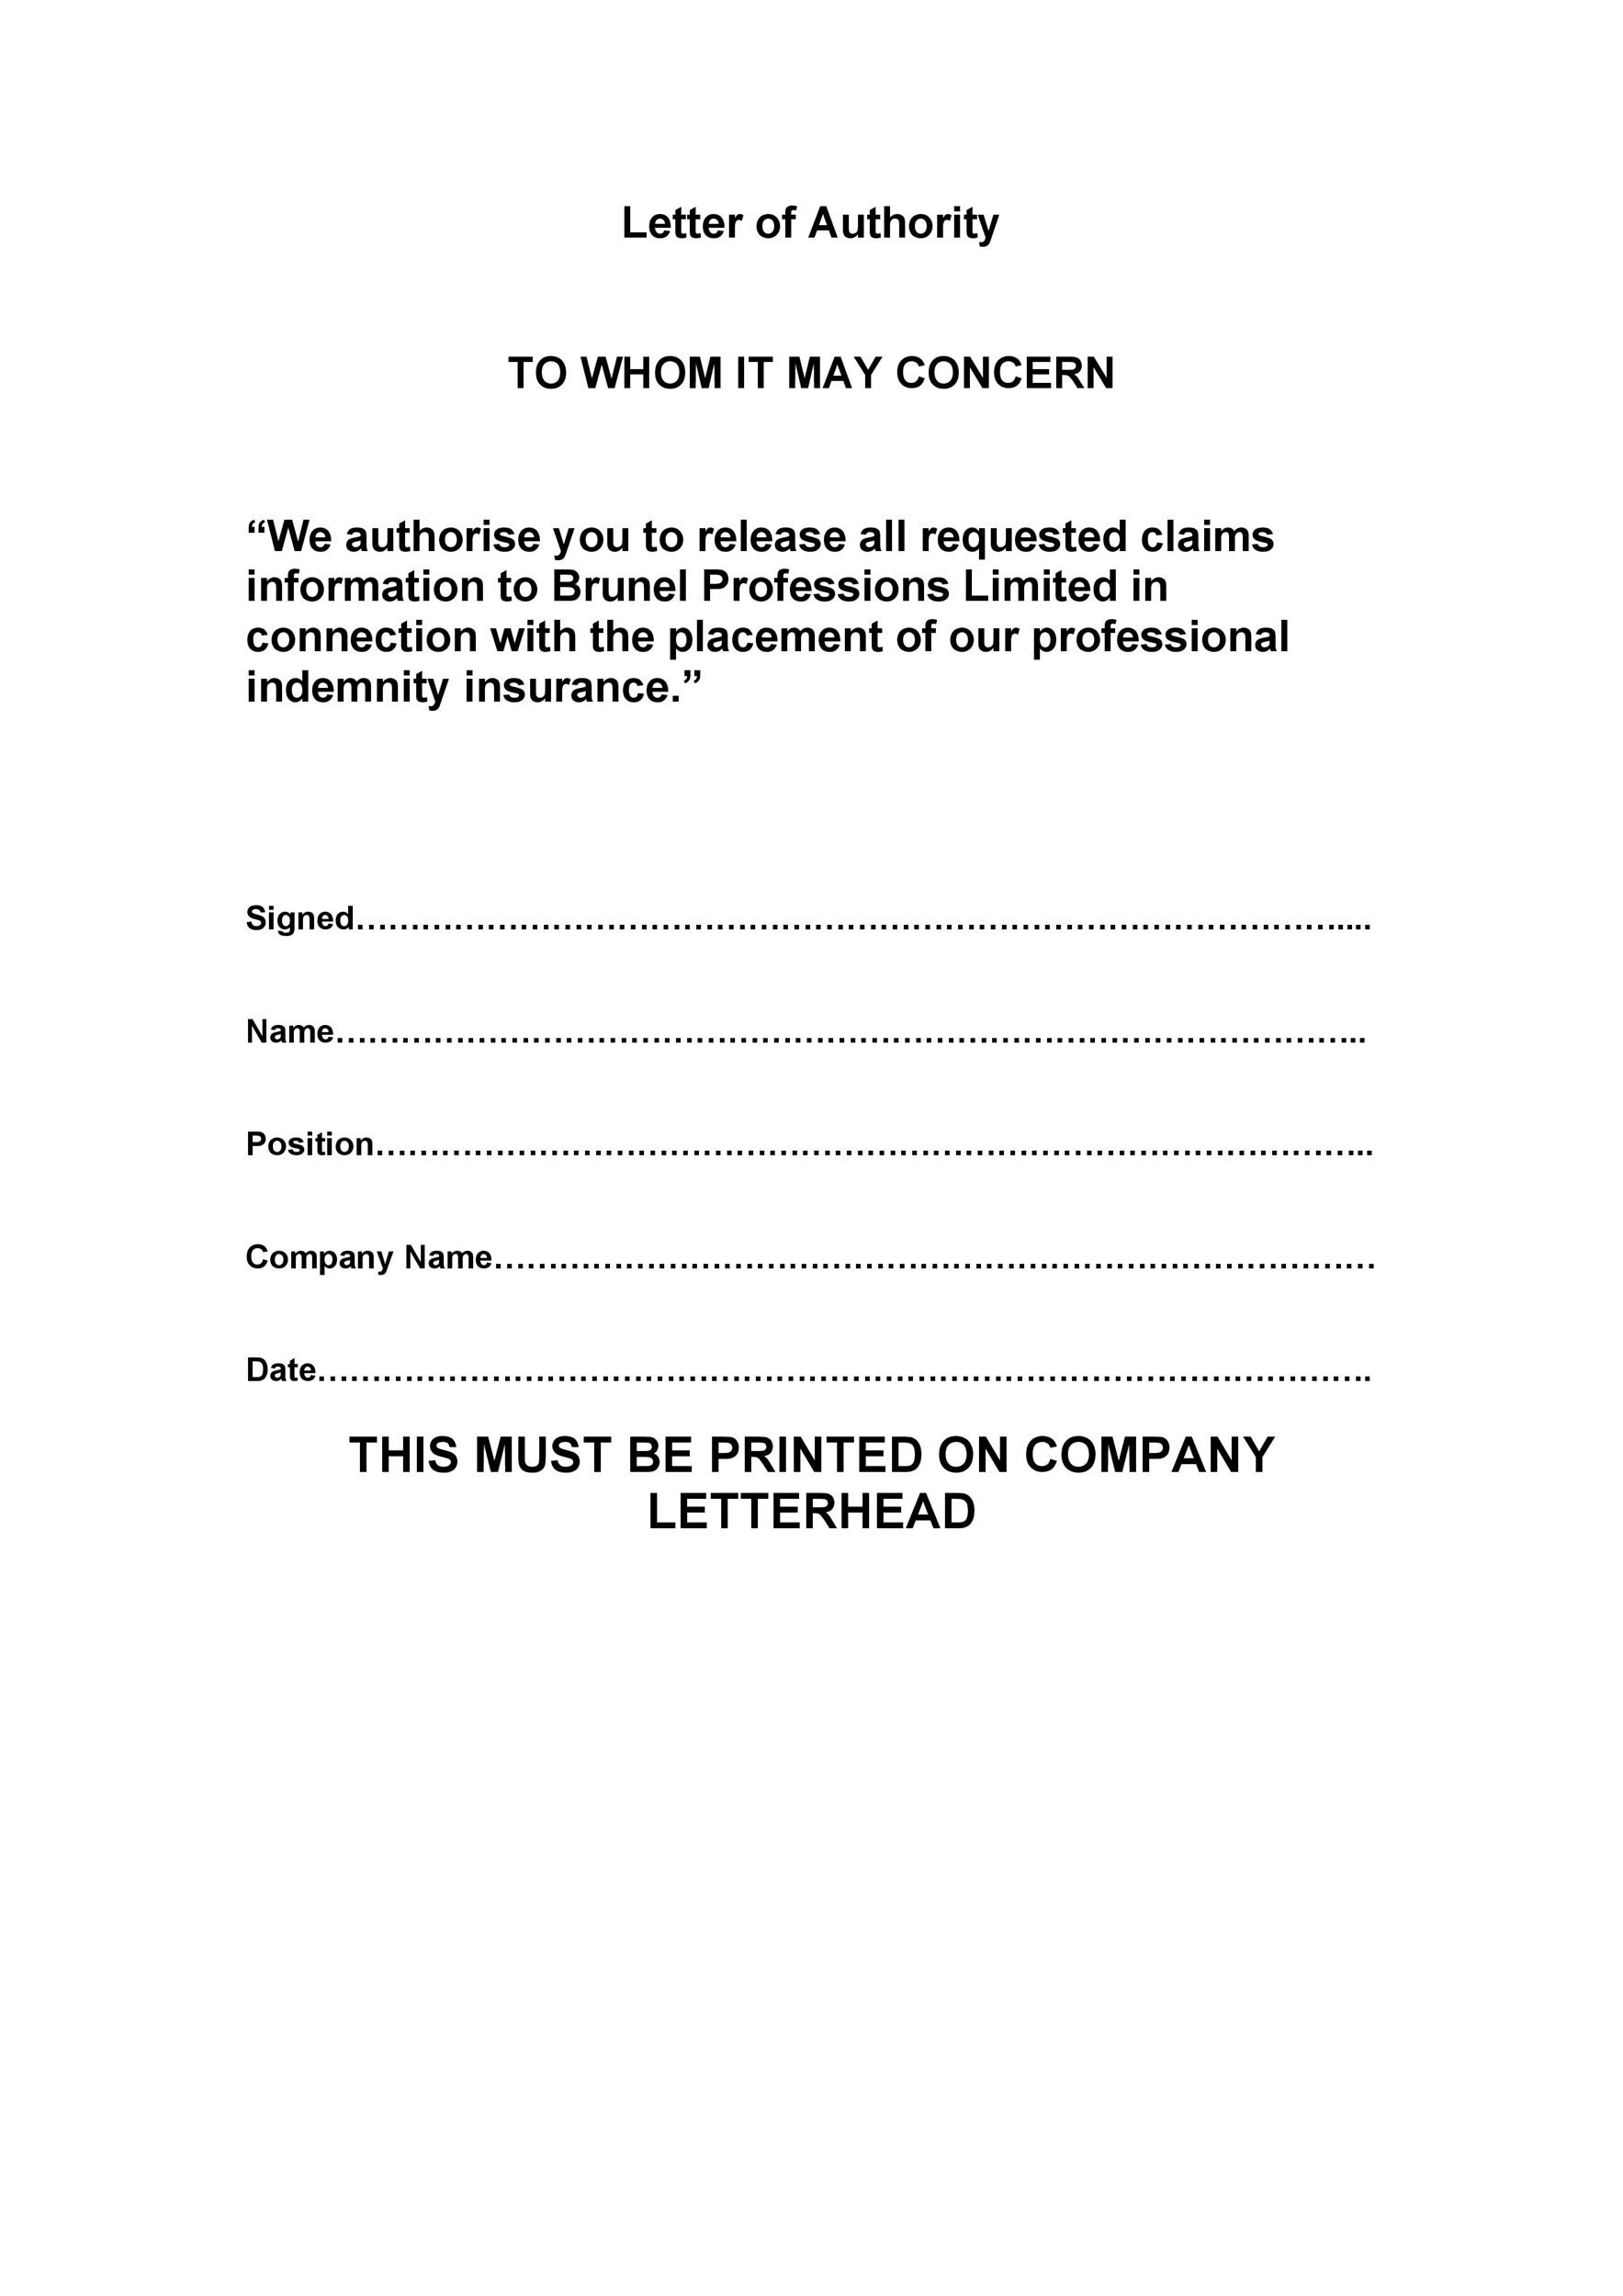 Writing A Letter To Whom It May Concern Template from templatelab.com